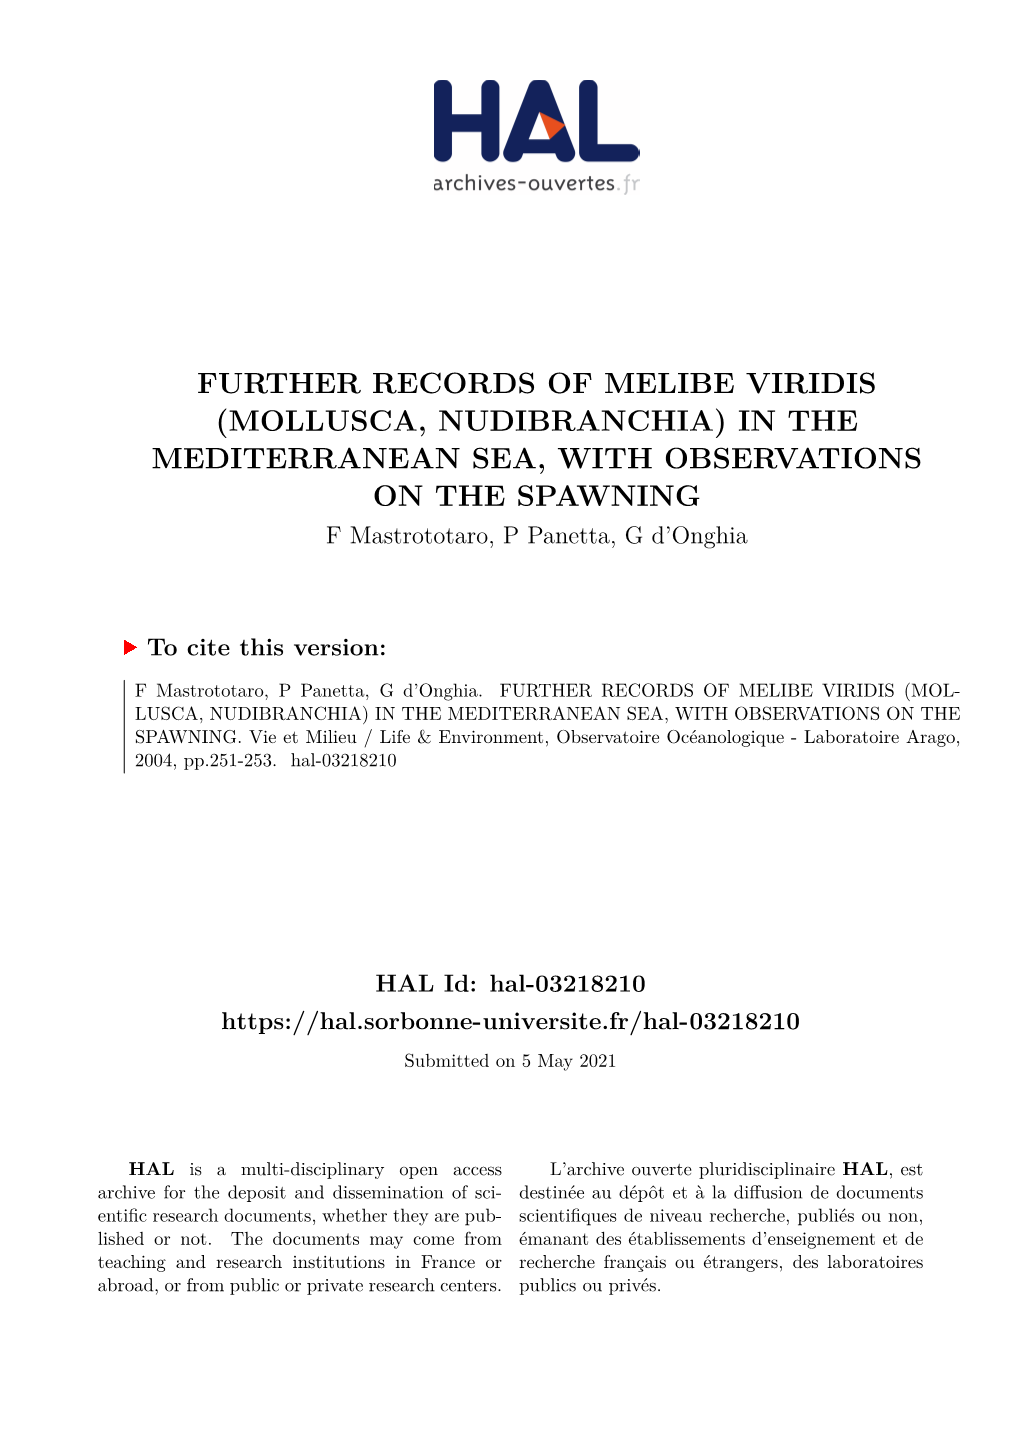 FURTHER RECORDS of MELIBE VIRIDIS (MOLLUSCA, NUDIBRANCHIA) in the MEDITERRANEAN SEA, with OBSERVATIONS on the SPAWNING F Mastrototaro, P Panetta, G D’Onghia